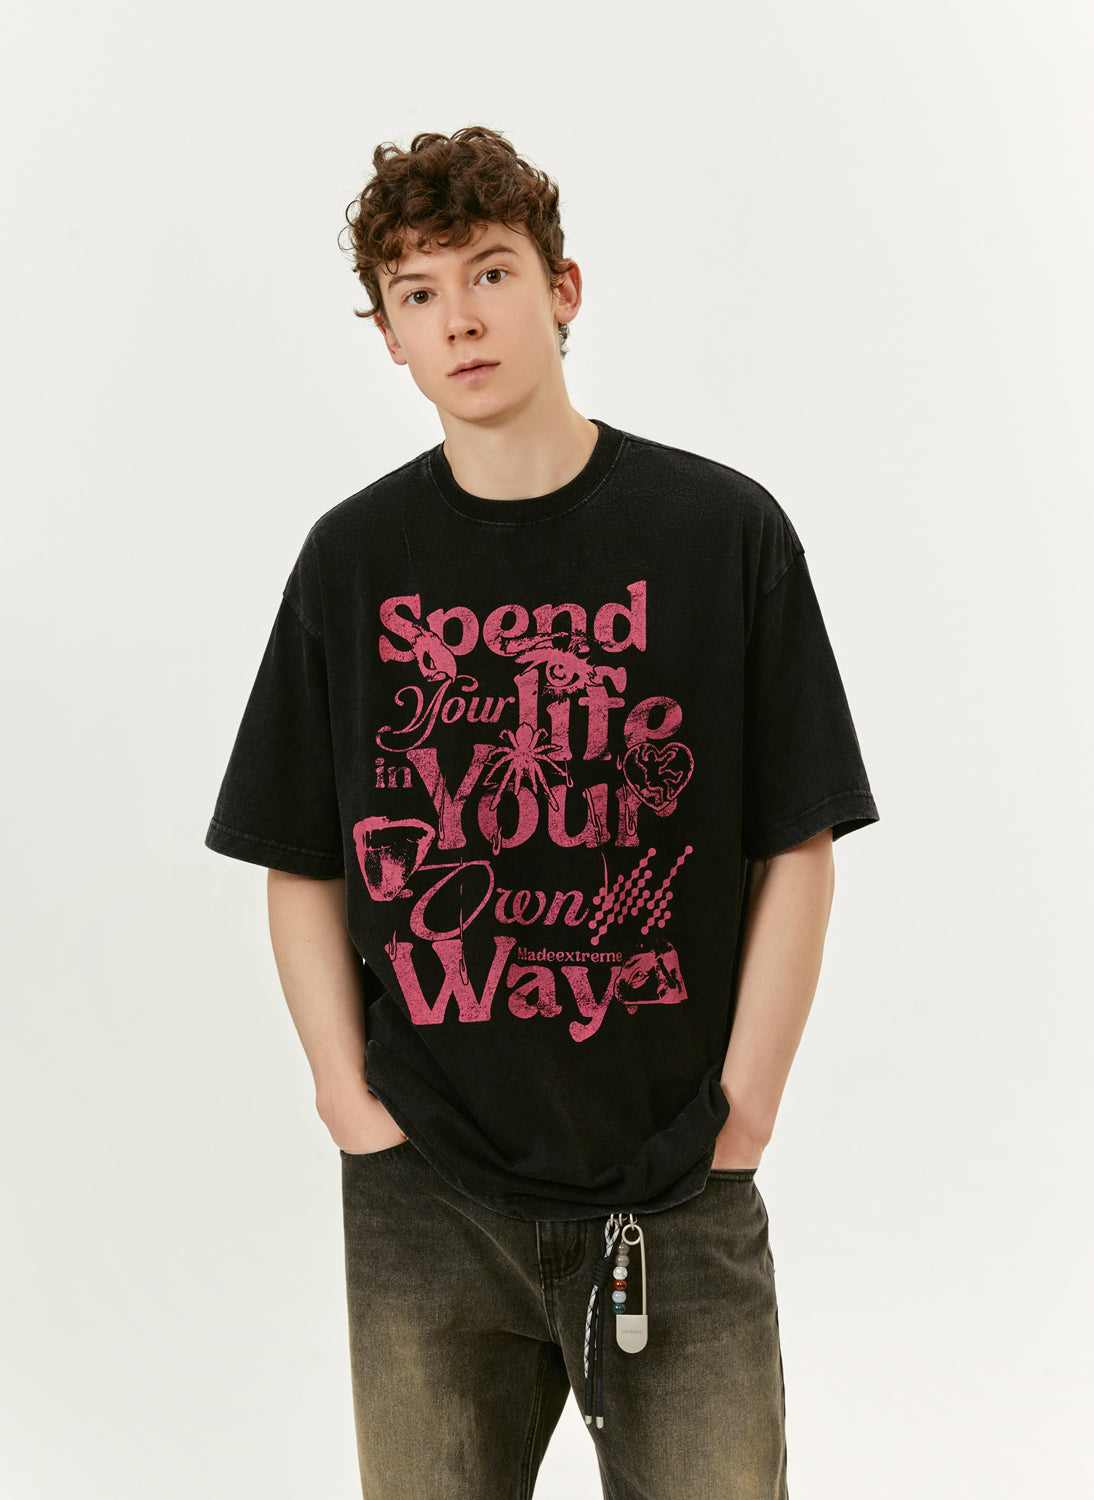 SPEND YOUR LIFE IN YOUR OWN WAY T-SHIRT